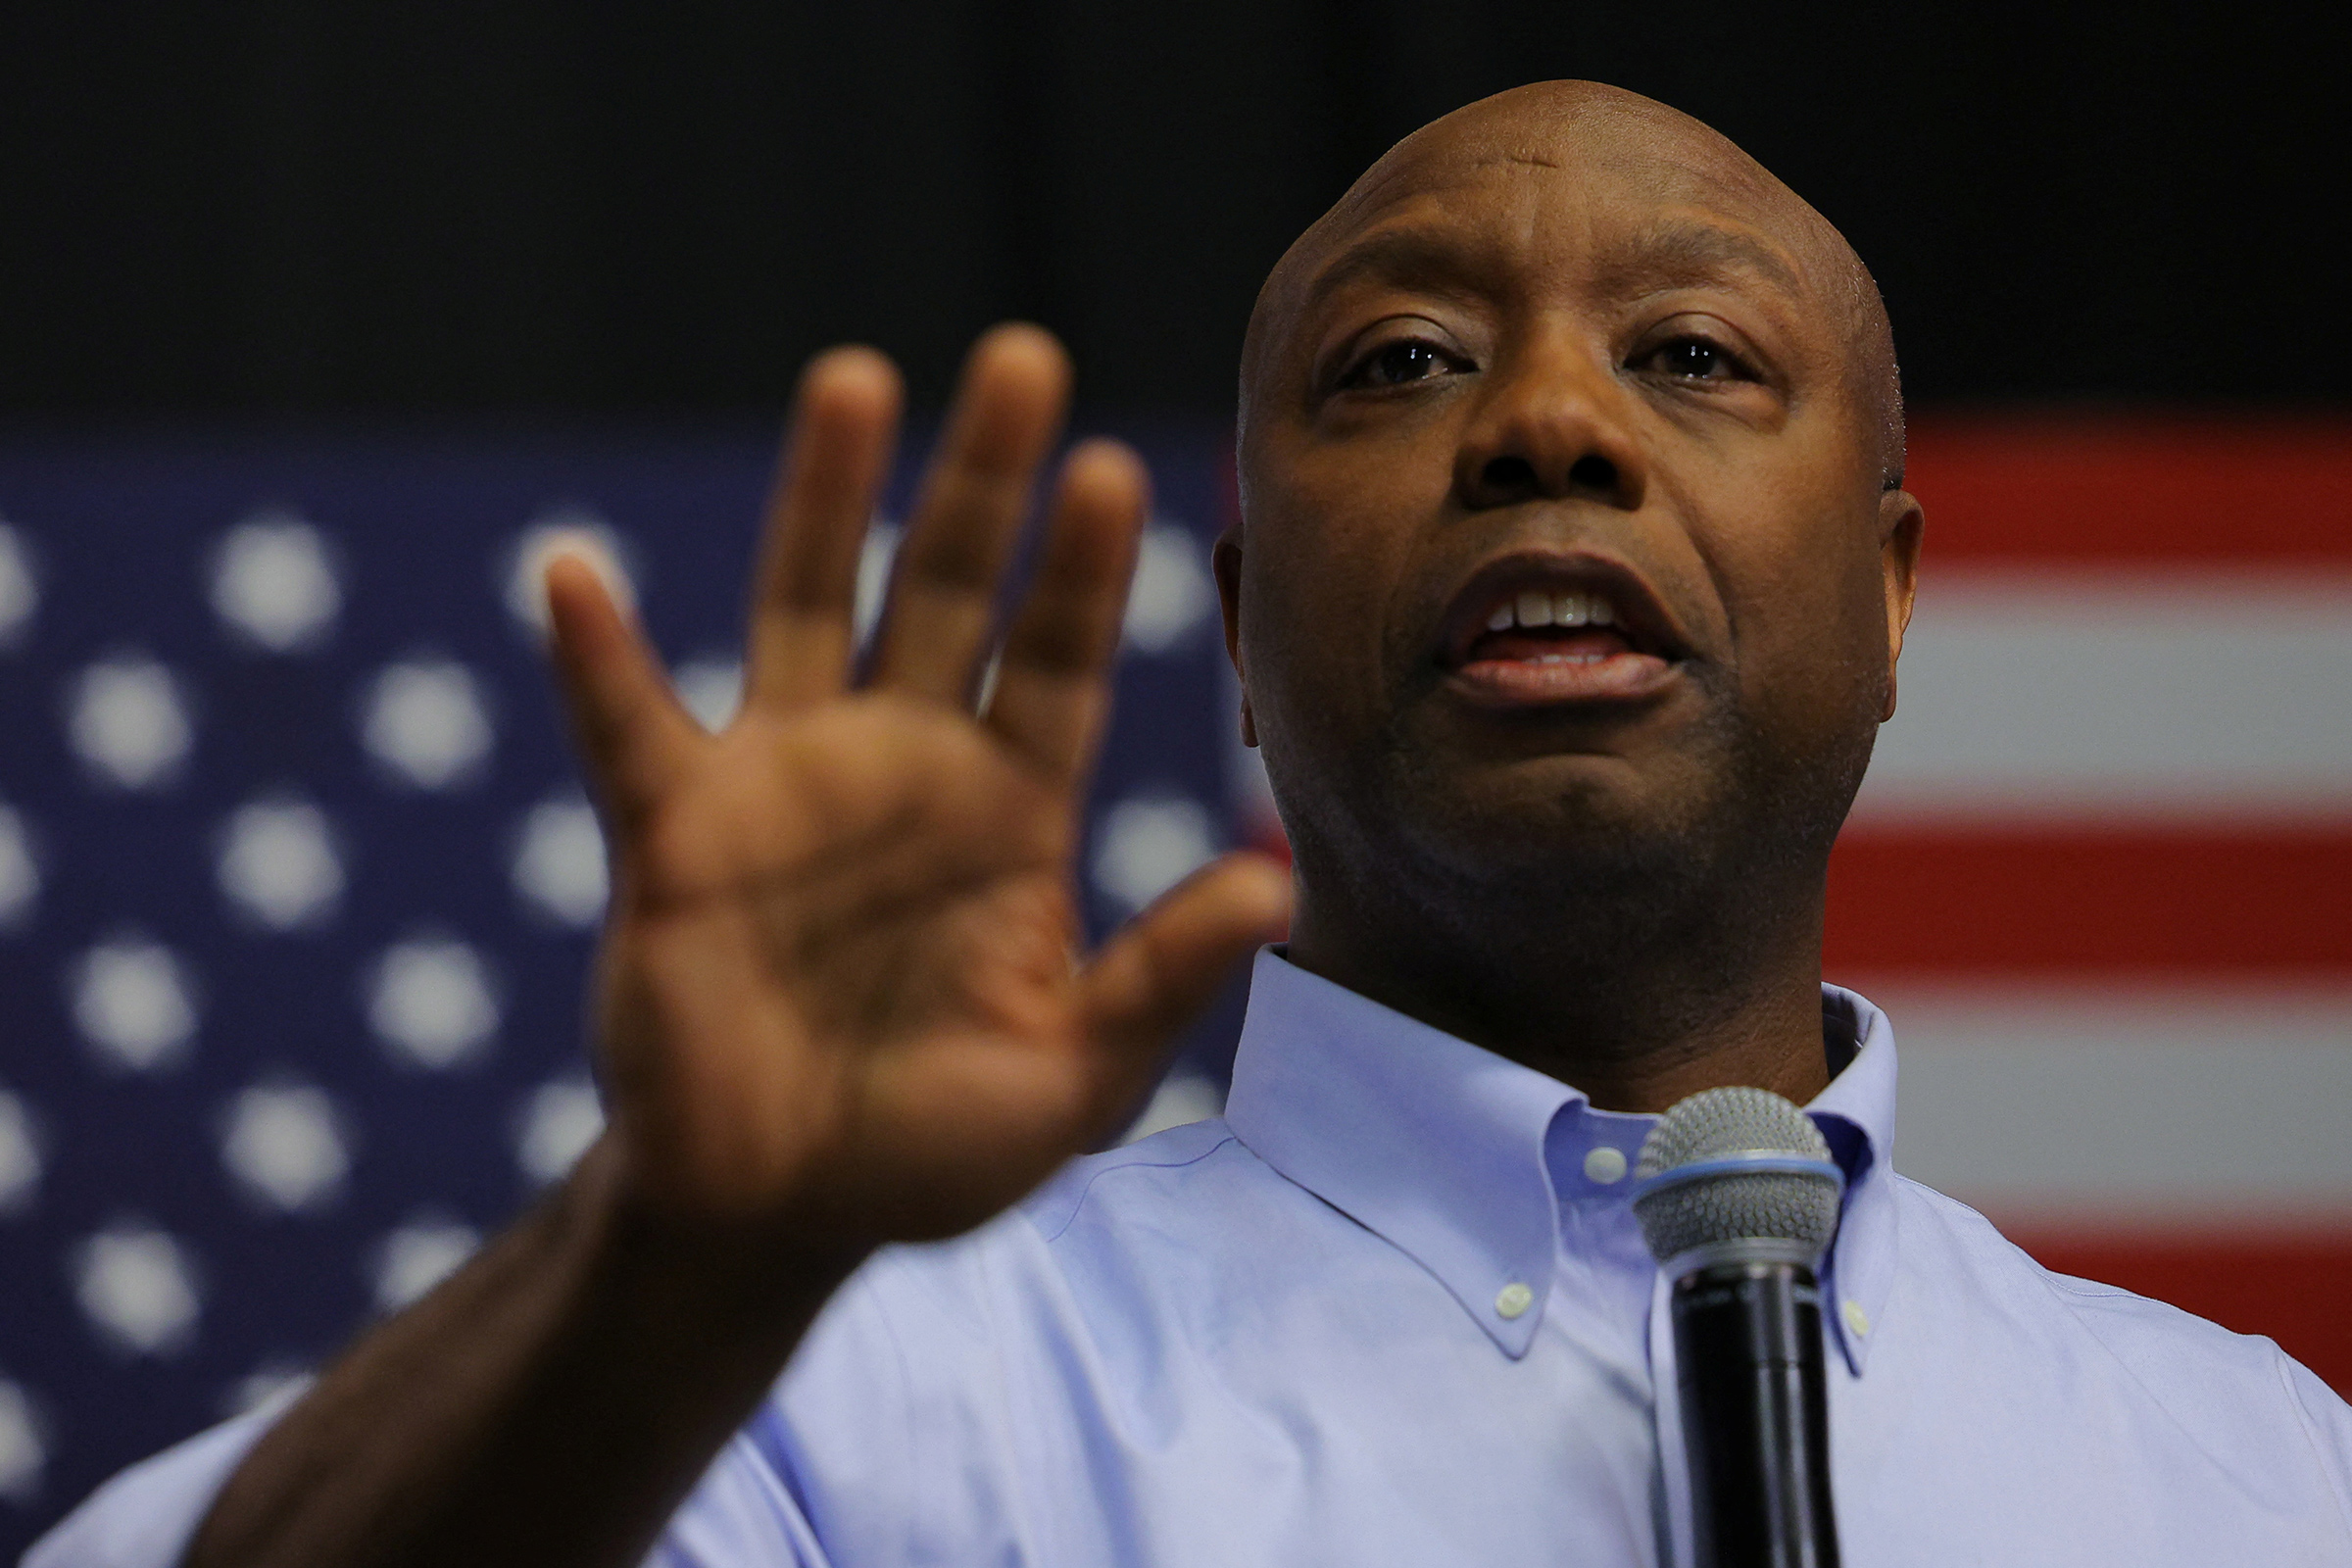 Likely Republican presidential candidate and U.S. Senator Tim Scott speaks at a campaign town hall meeting at the New Hampshire Institute of Politics at Saint Anselm College, in Manchester, New Hampshire, on May 8. (Brian Snyder—Reuters)